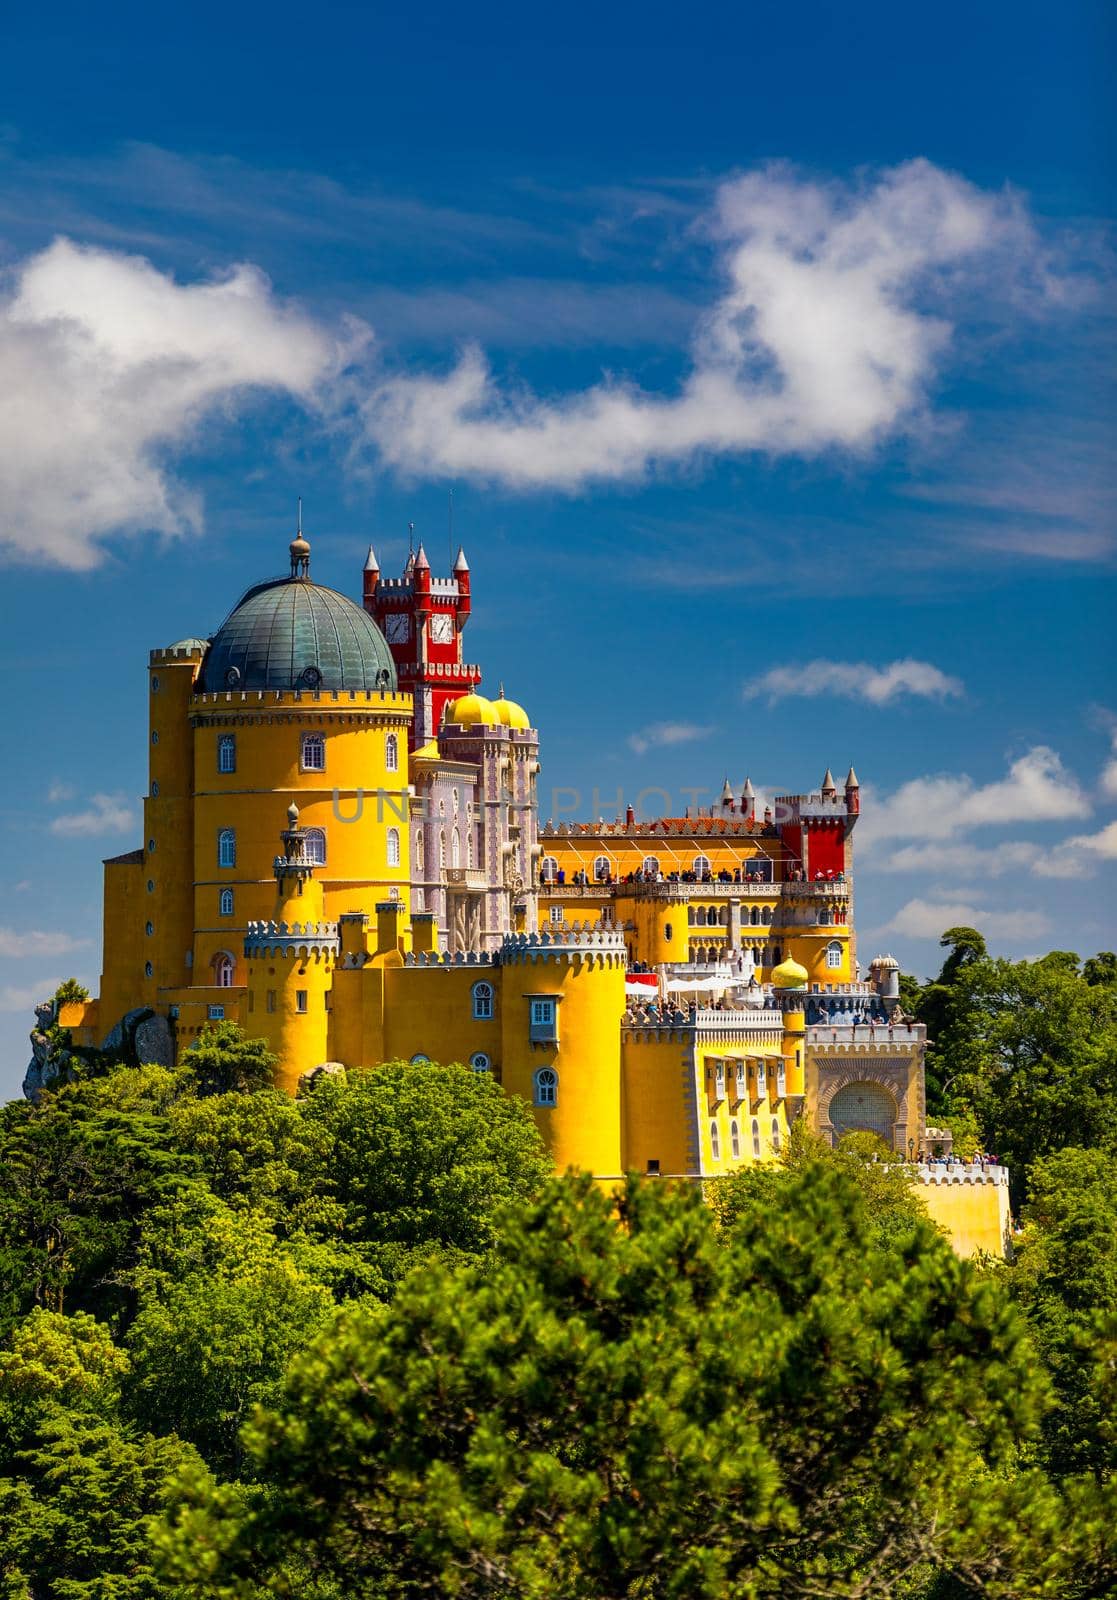 Palace of Pena in Sintra. Lisbon, Portugal. Travel Europe, holidays in Portugal. Panoramic View Of Pena Palace, Sintra, Portugal. Pena National Palace, Sintra, Portugal. 